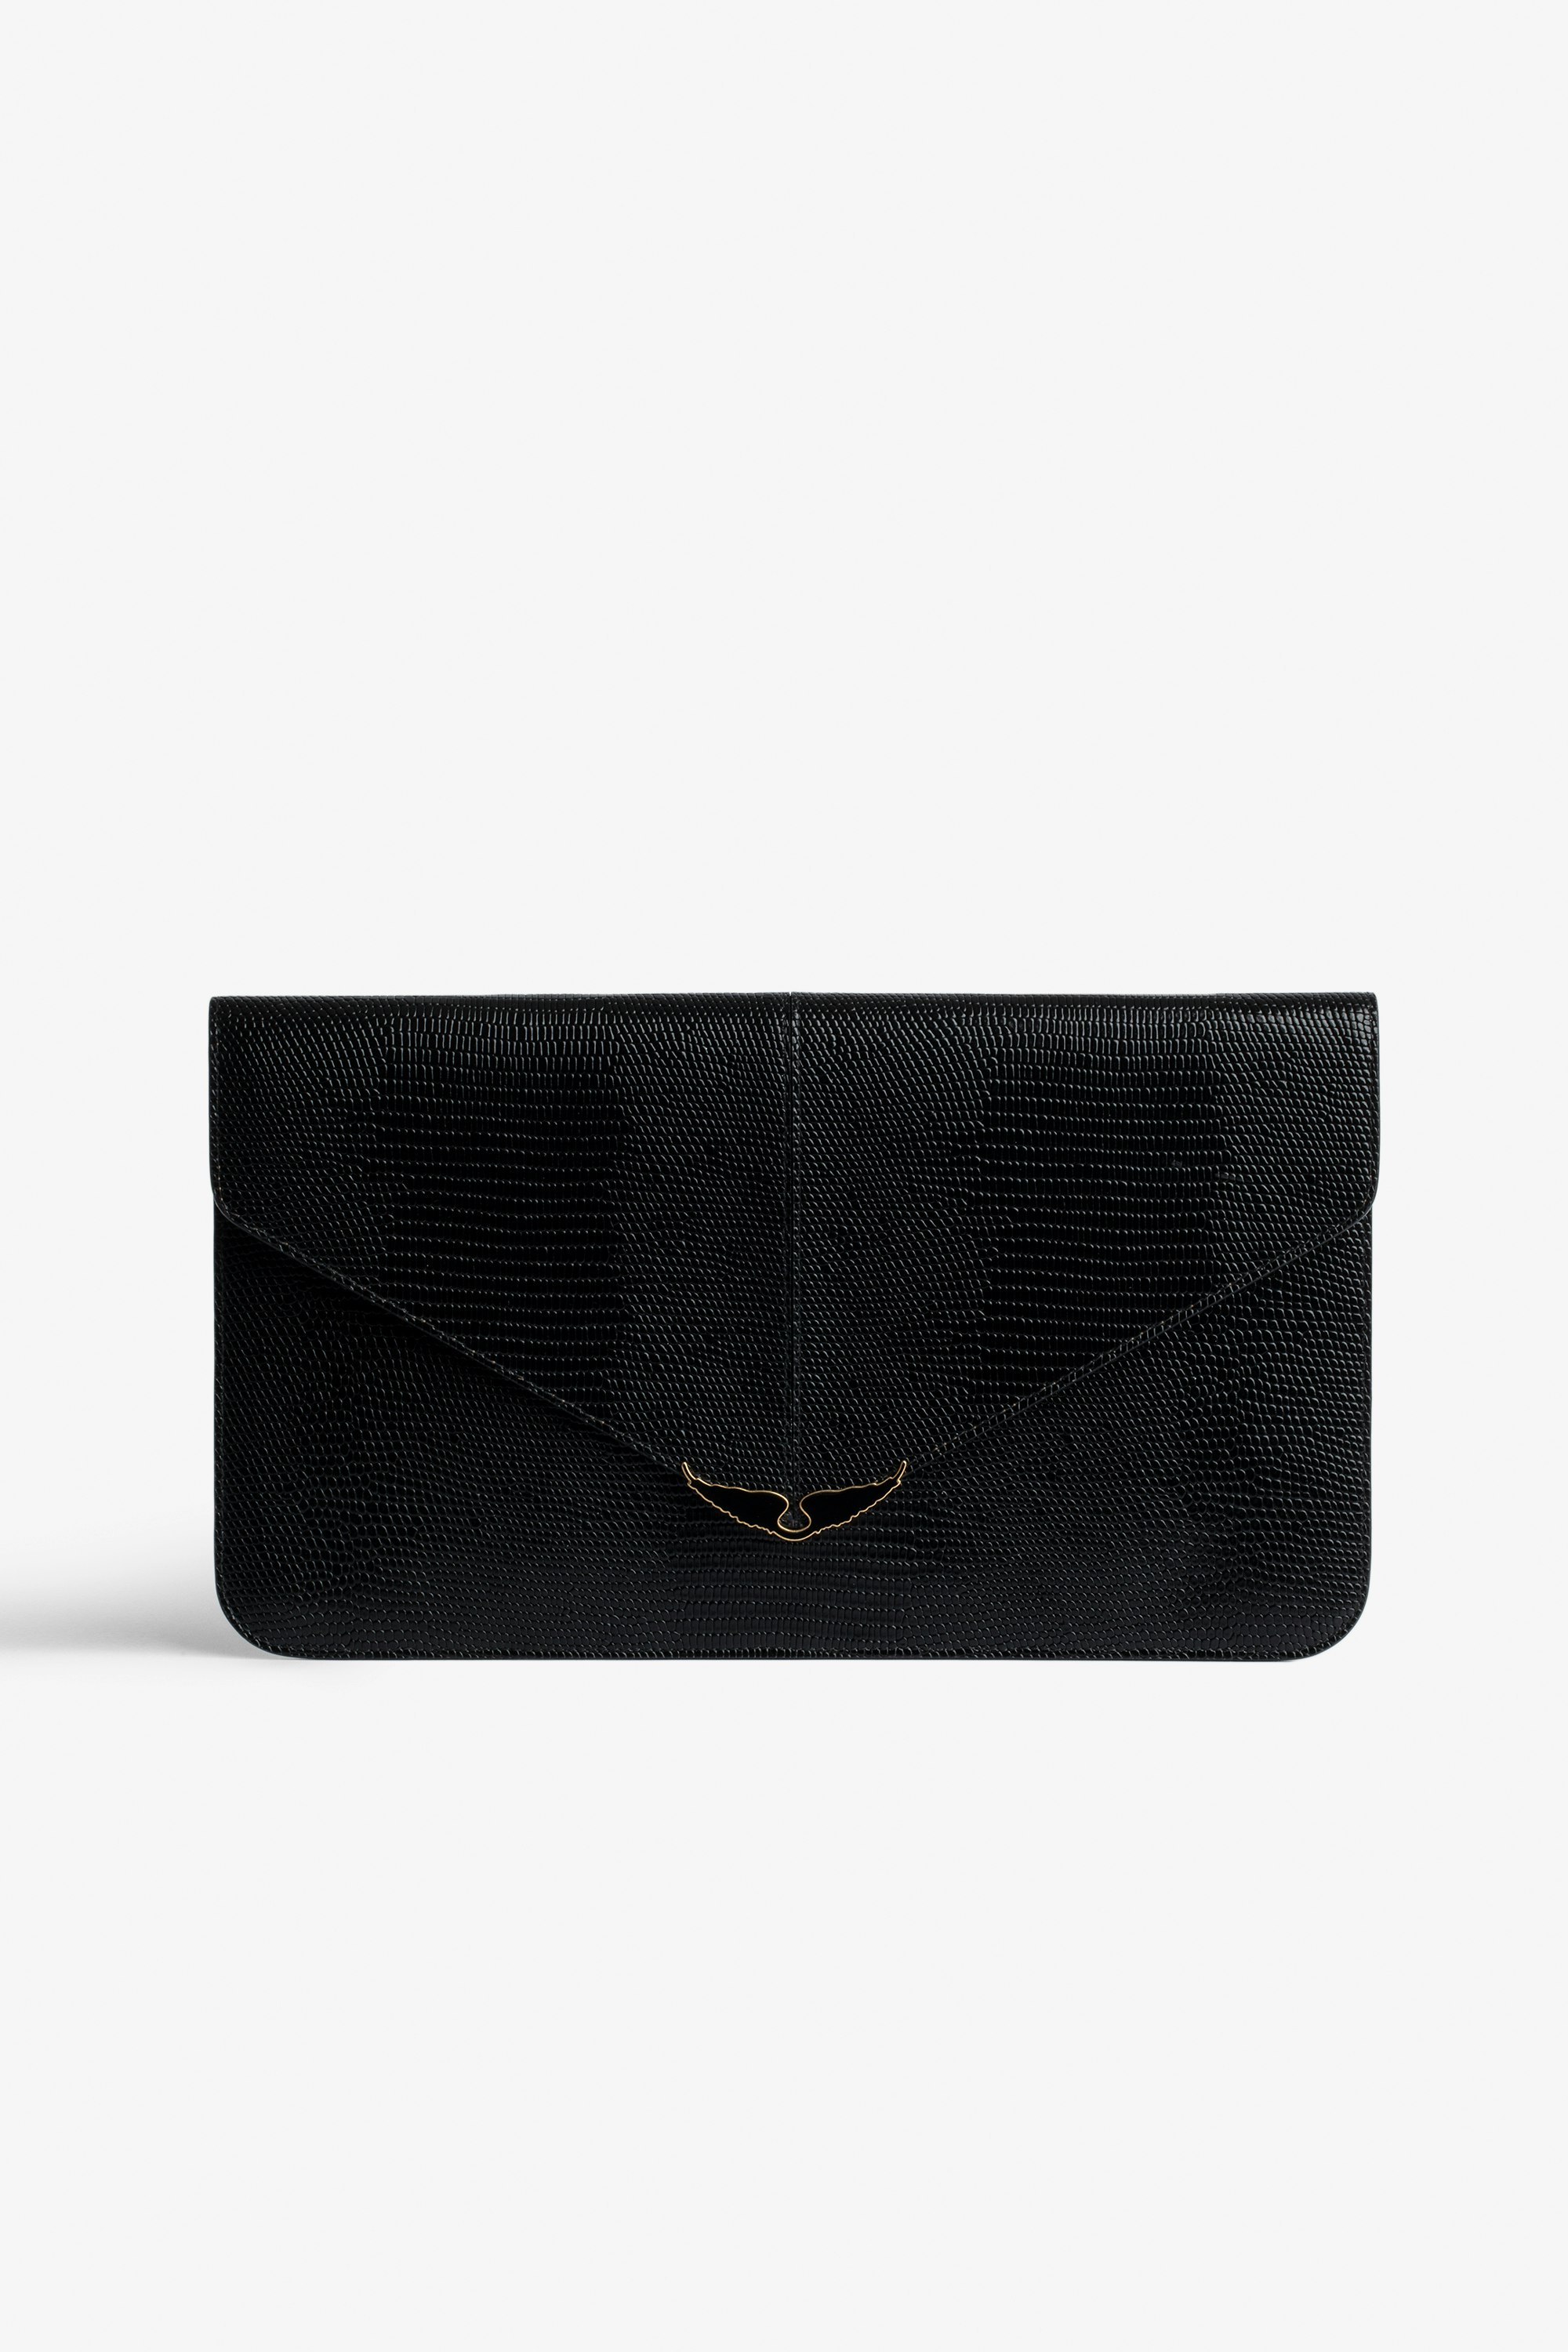 Borderline Clutch Women’s envelope clutch in shiny black leather with embossed iguana, khaki suede interior, and black lacquered wings on the clasp.